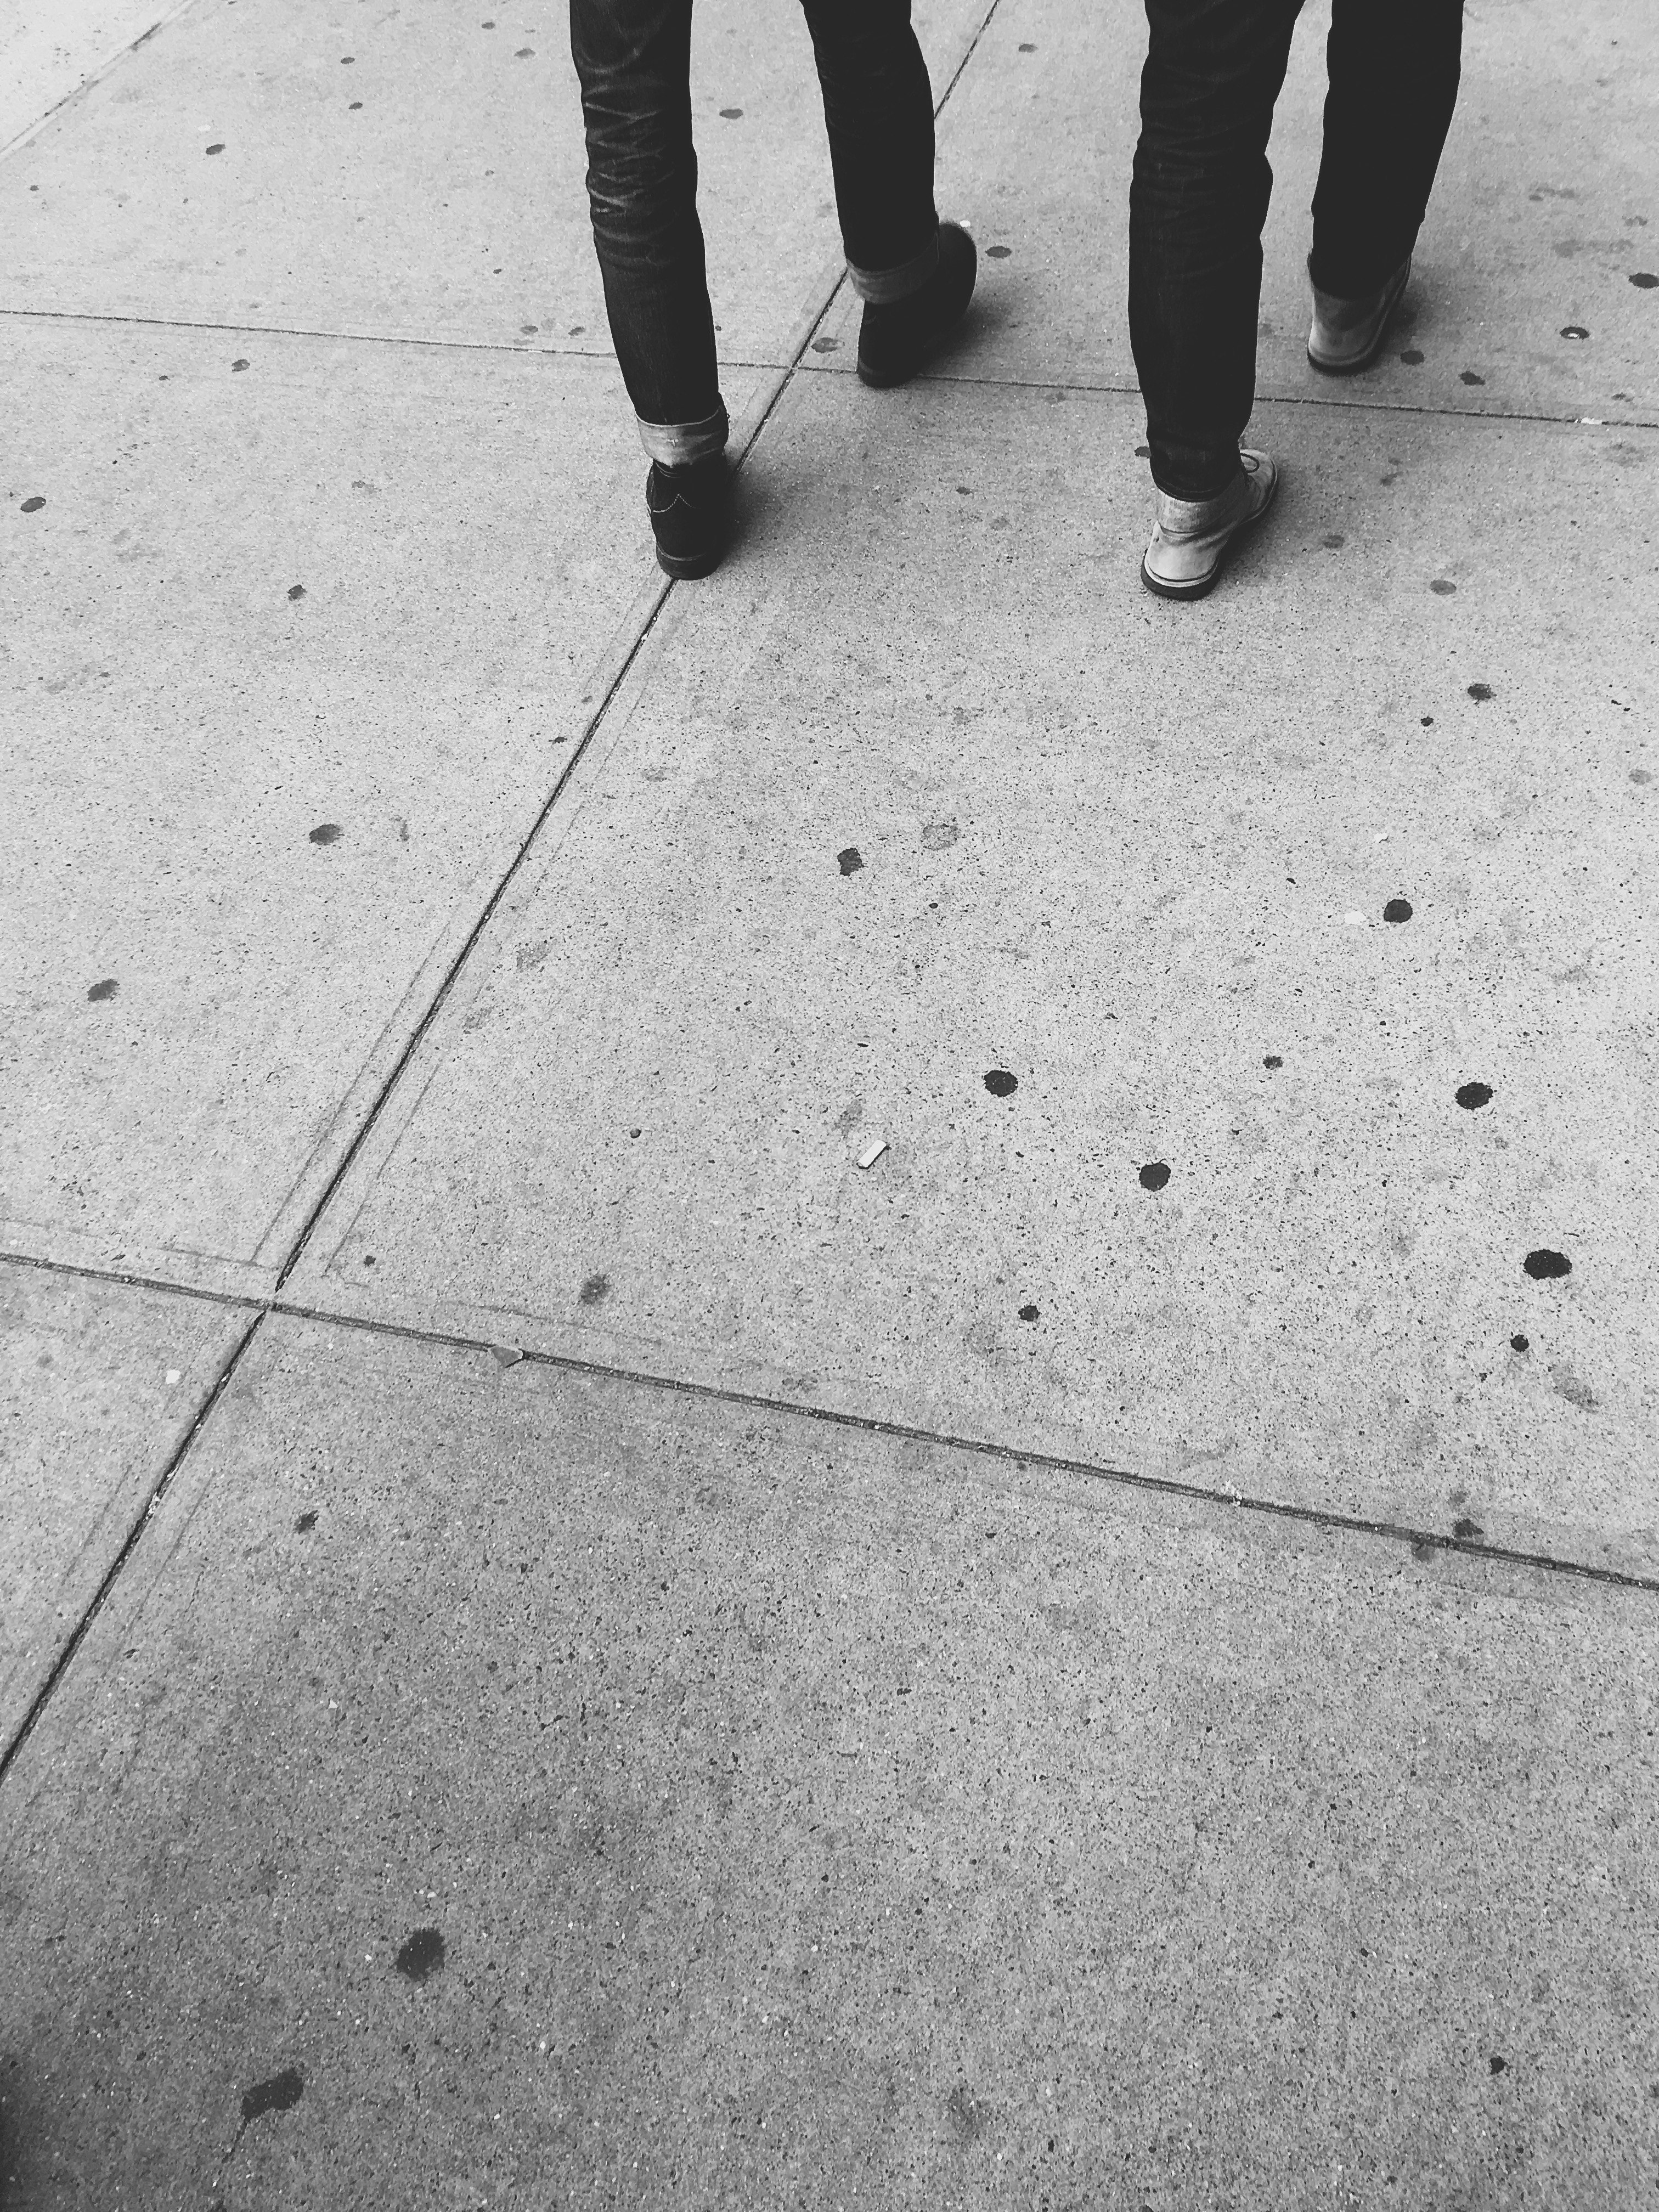 two persons walking on concrete floor